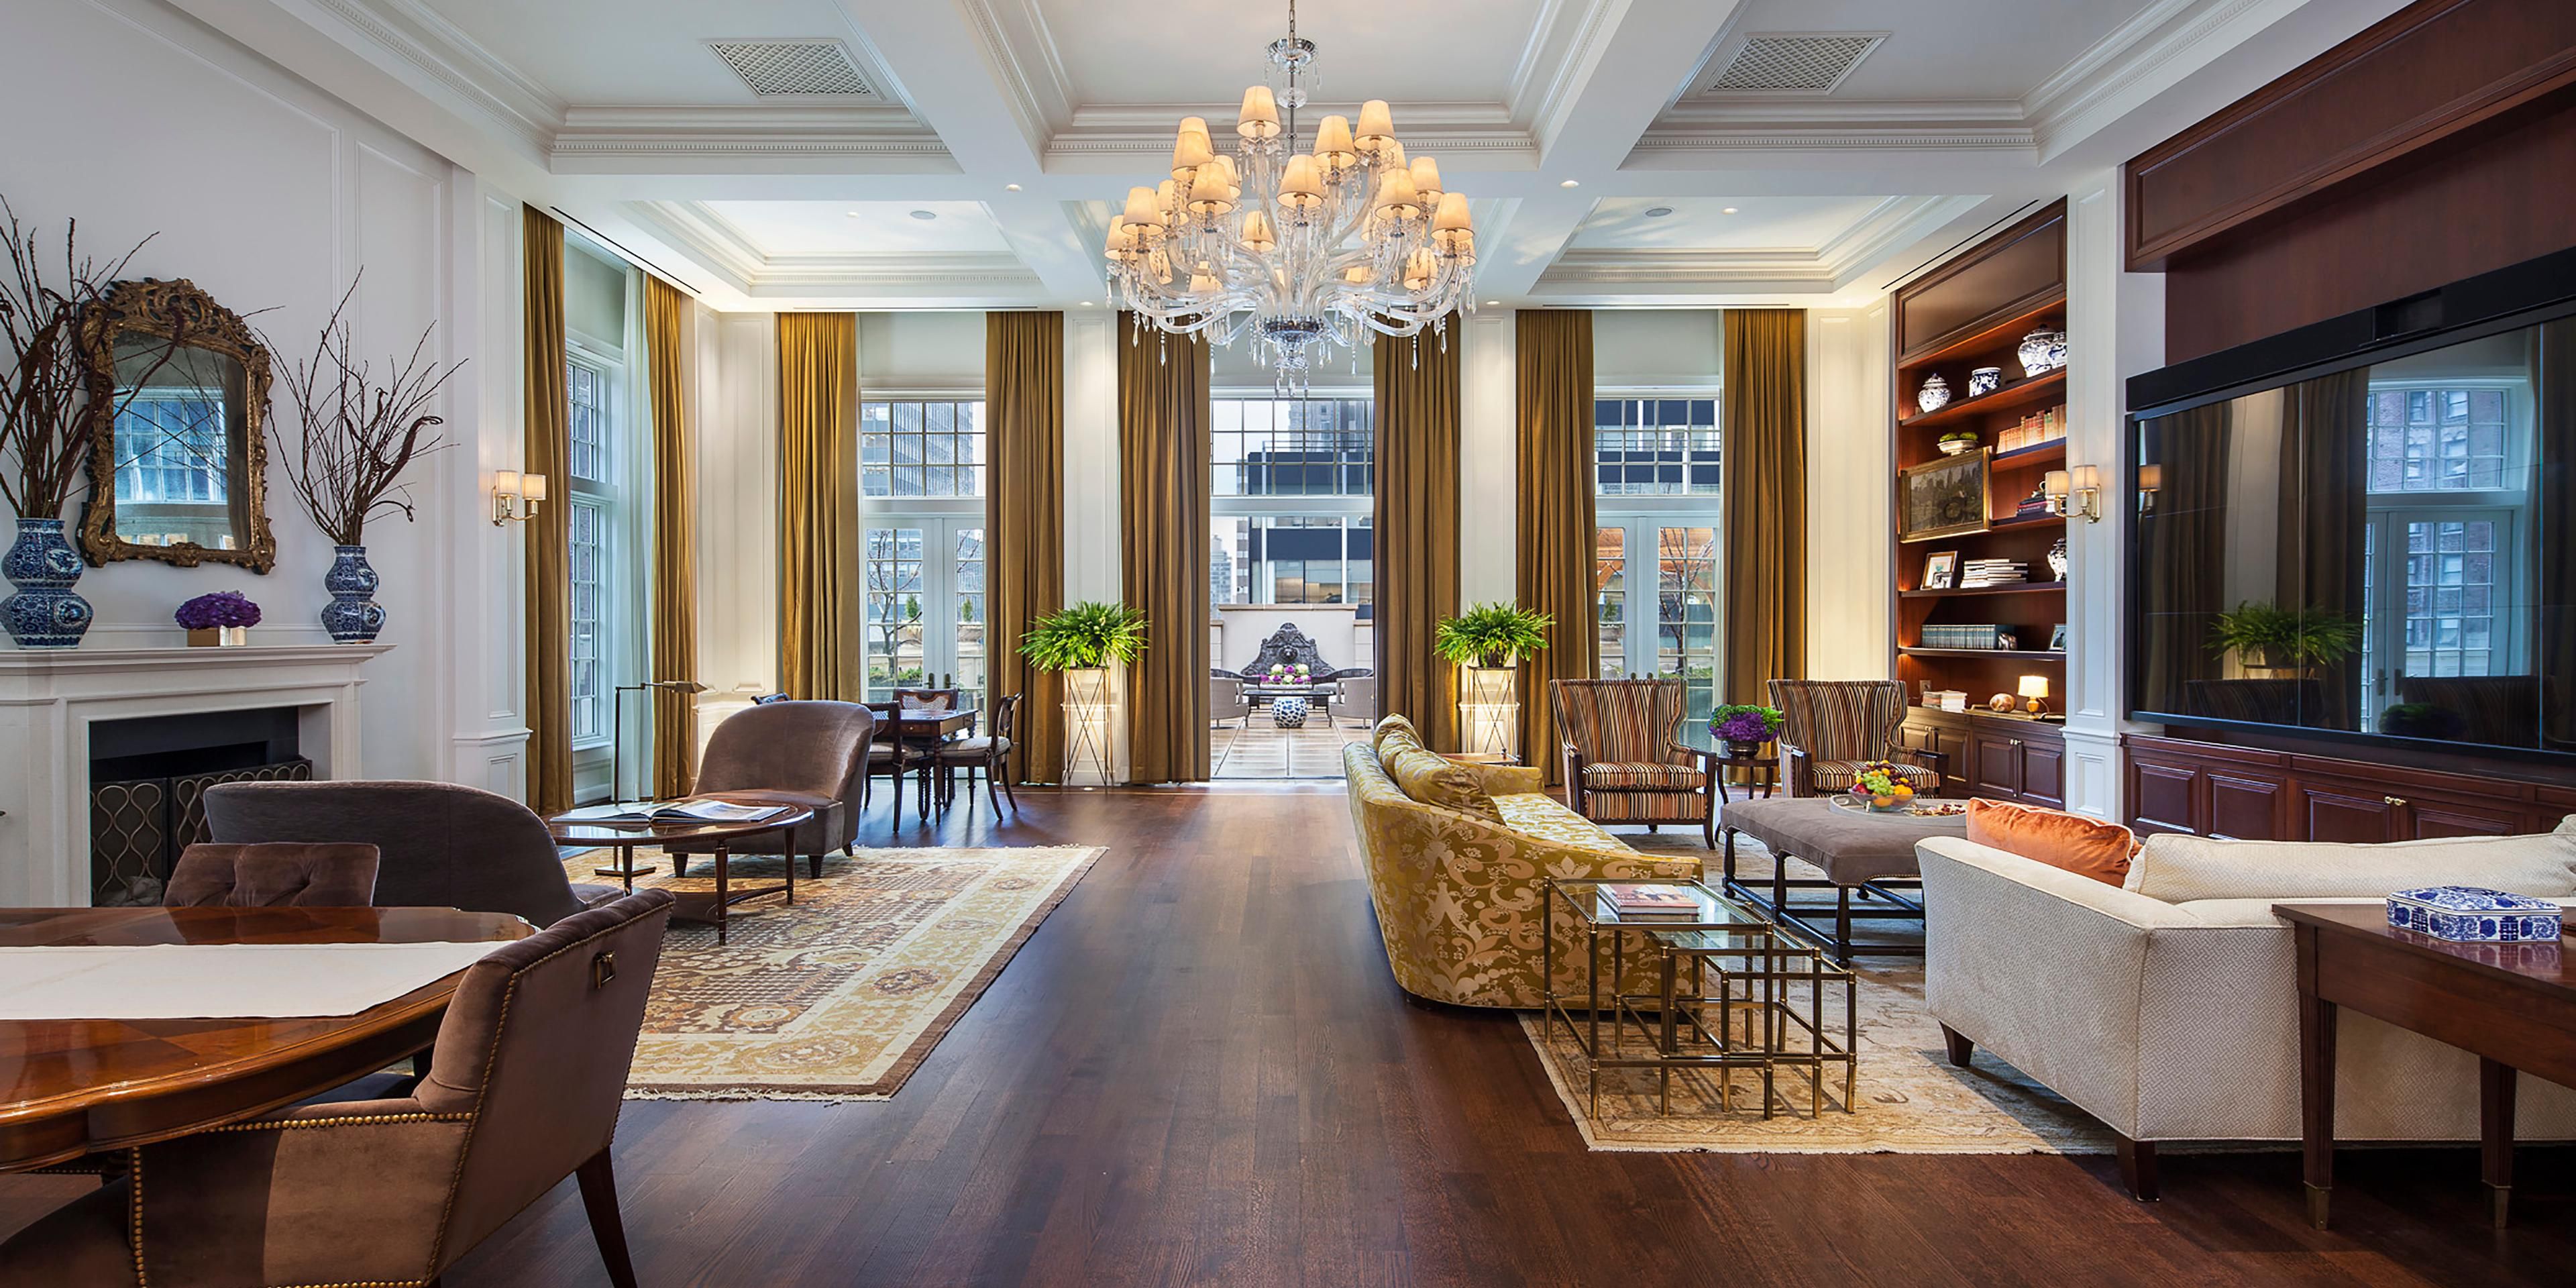 Despite evoking an intimate mansion, our hotel features 704 rooms and 32 suites. Almost 200 rooms are interconnecting, as are our suites which can include up to four bedrooms. Our Bespoke B Collection includes five unique sanctums at the top of the hotel, while our stunning Penthouse overlooks the Chrysler Building.